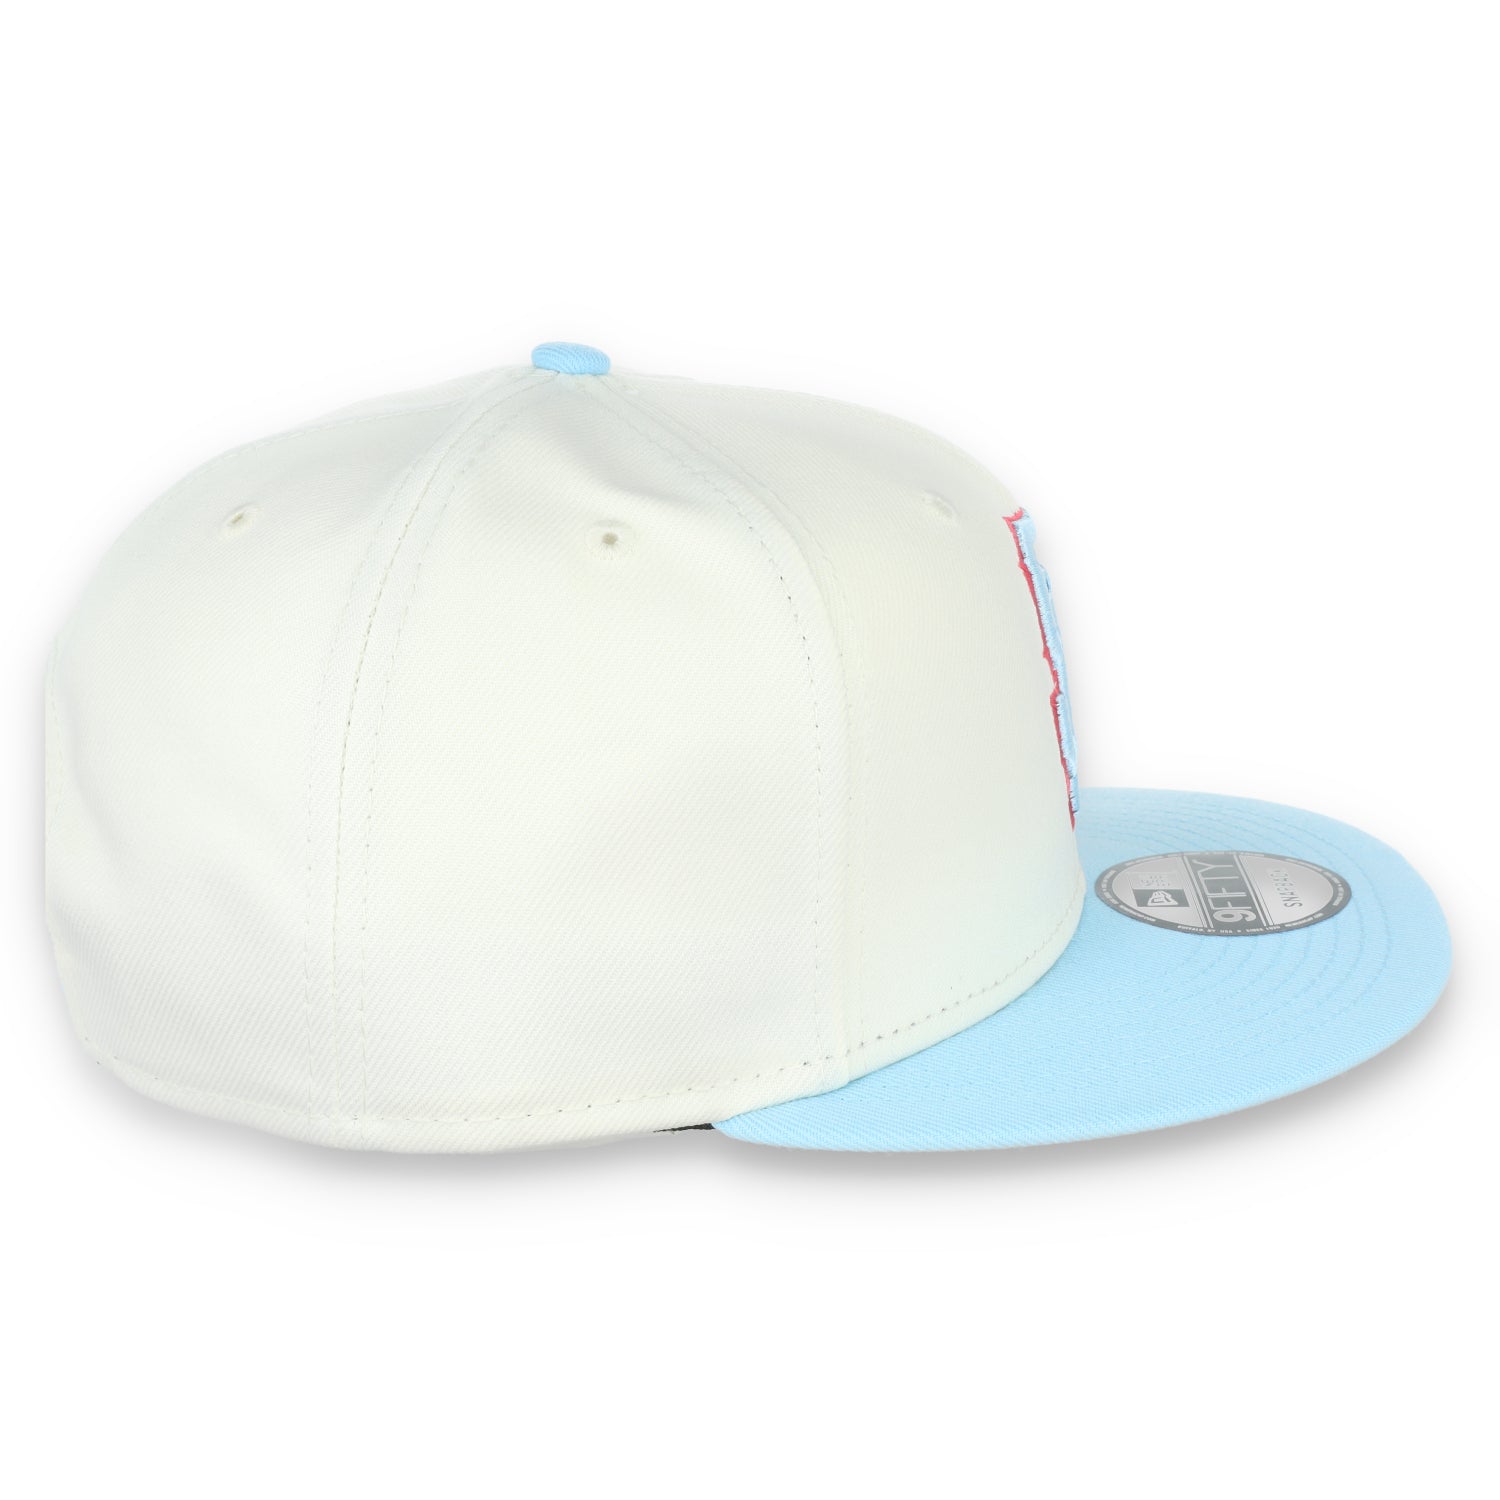 New Era San Francisco Giants 2-Tone Color Pack 9FIFTY Snapback Hat-Chrome/Baby Blue